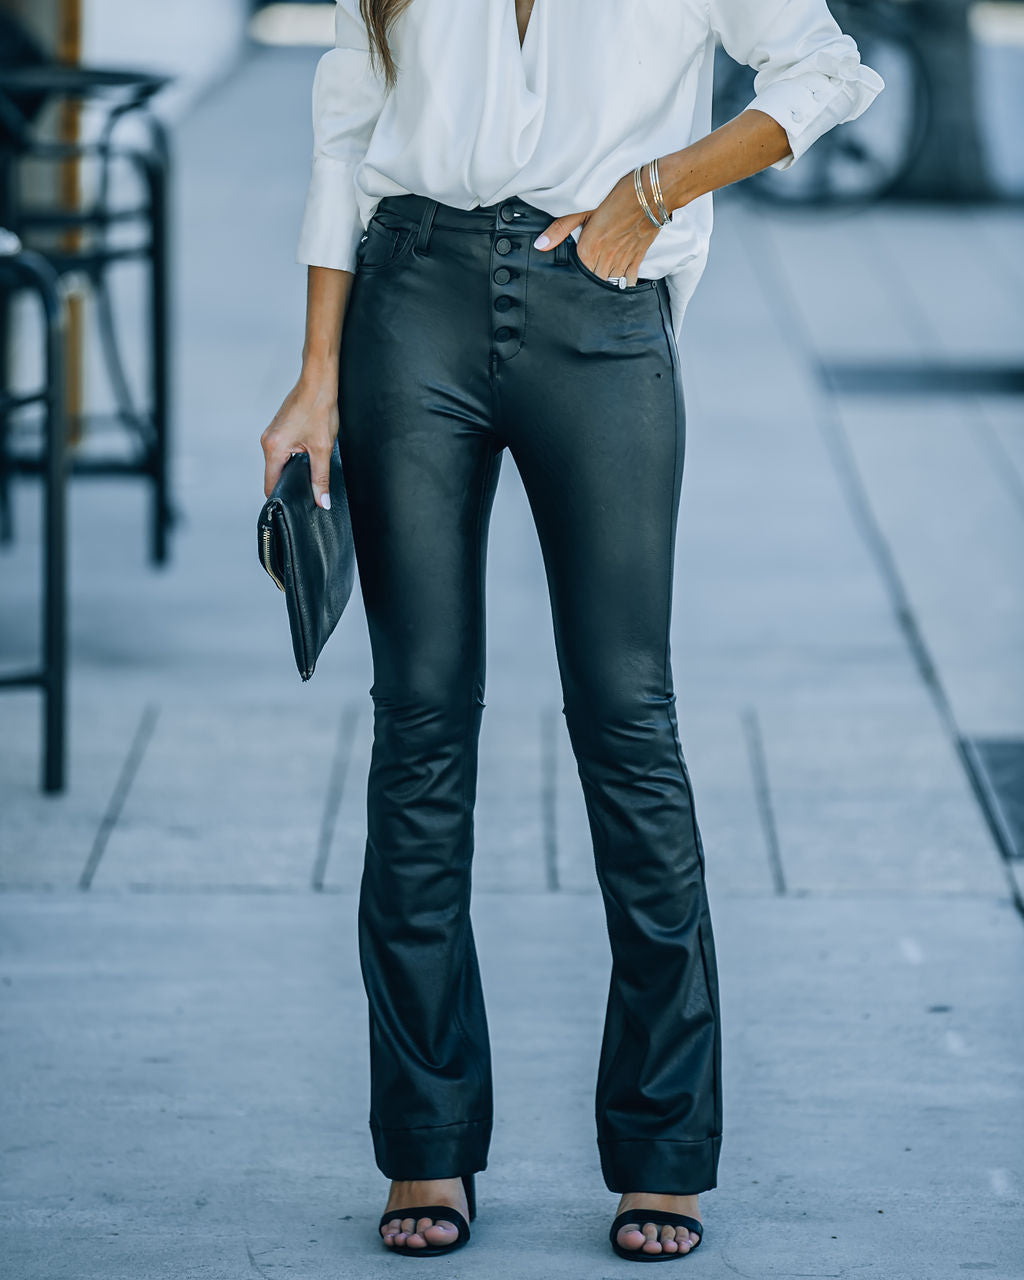 Slim White Flared Denim High Waisted Flare Jeans With Stretchy Lining For  Women Sizes S 3XL Sale Item #210915 From Bai06, $19.48 | DHgate.Com